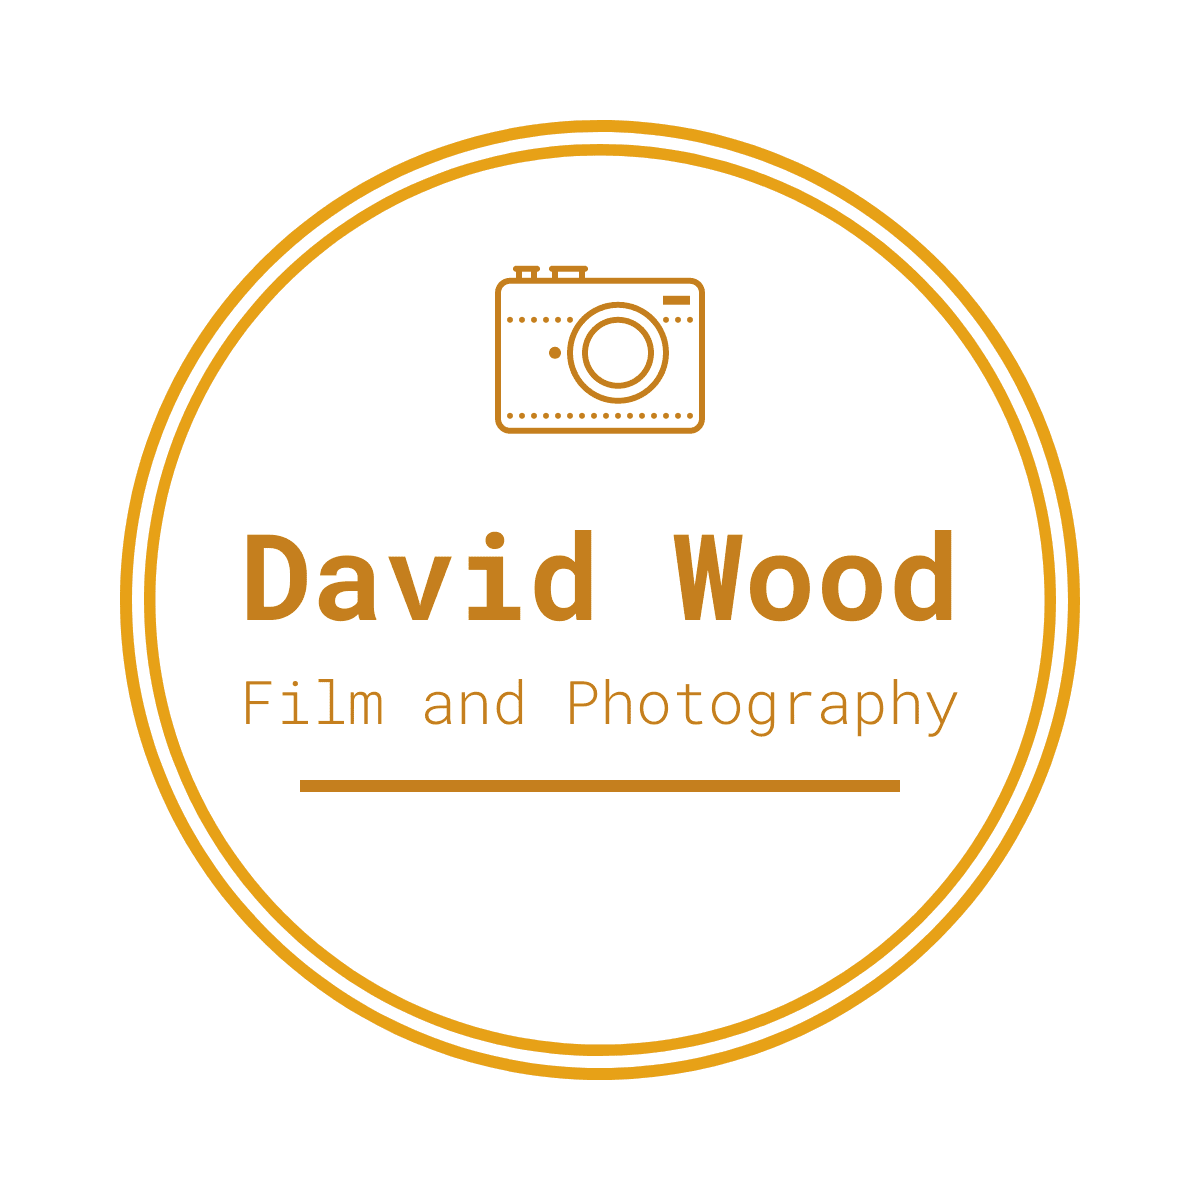   David Wood Film and photography